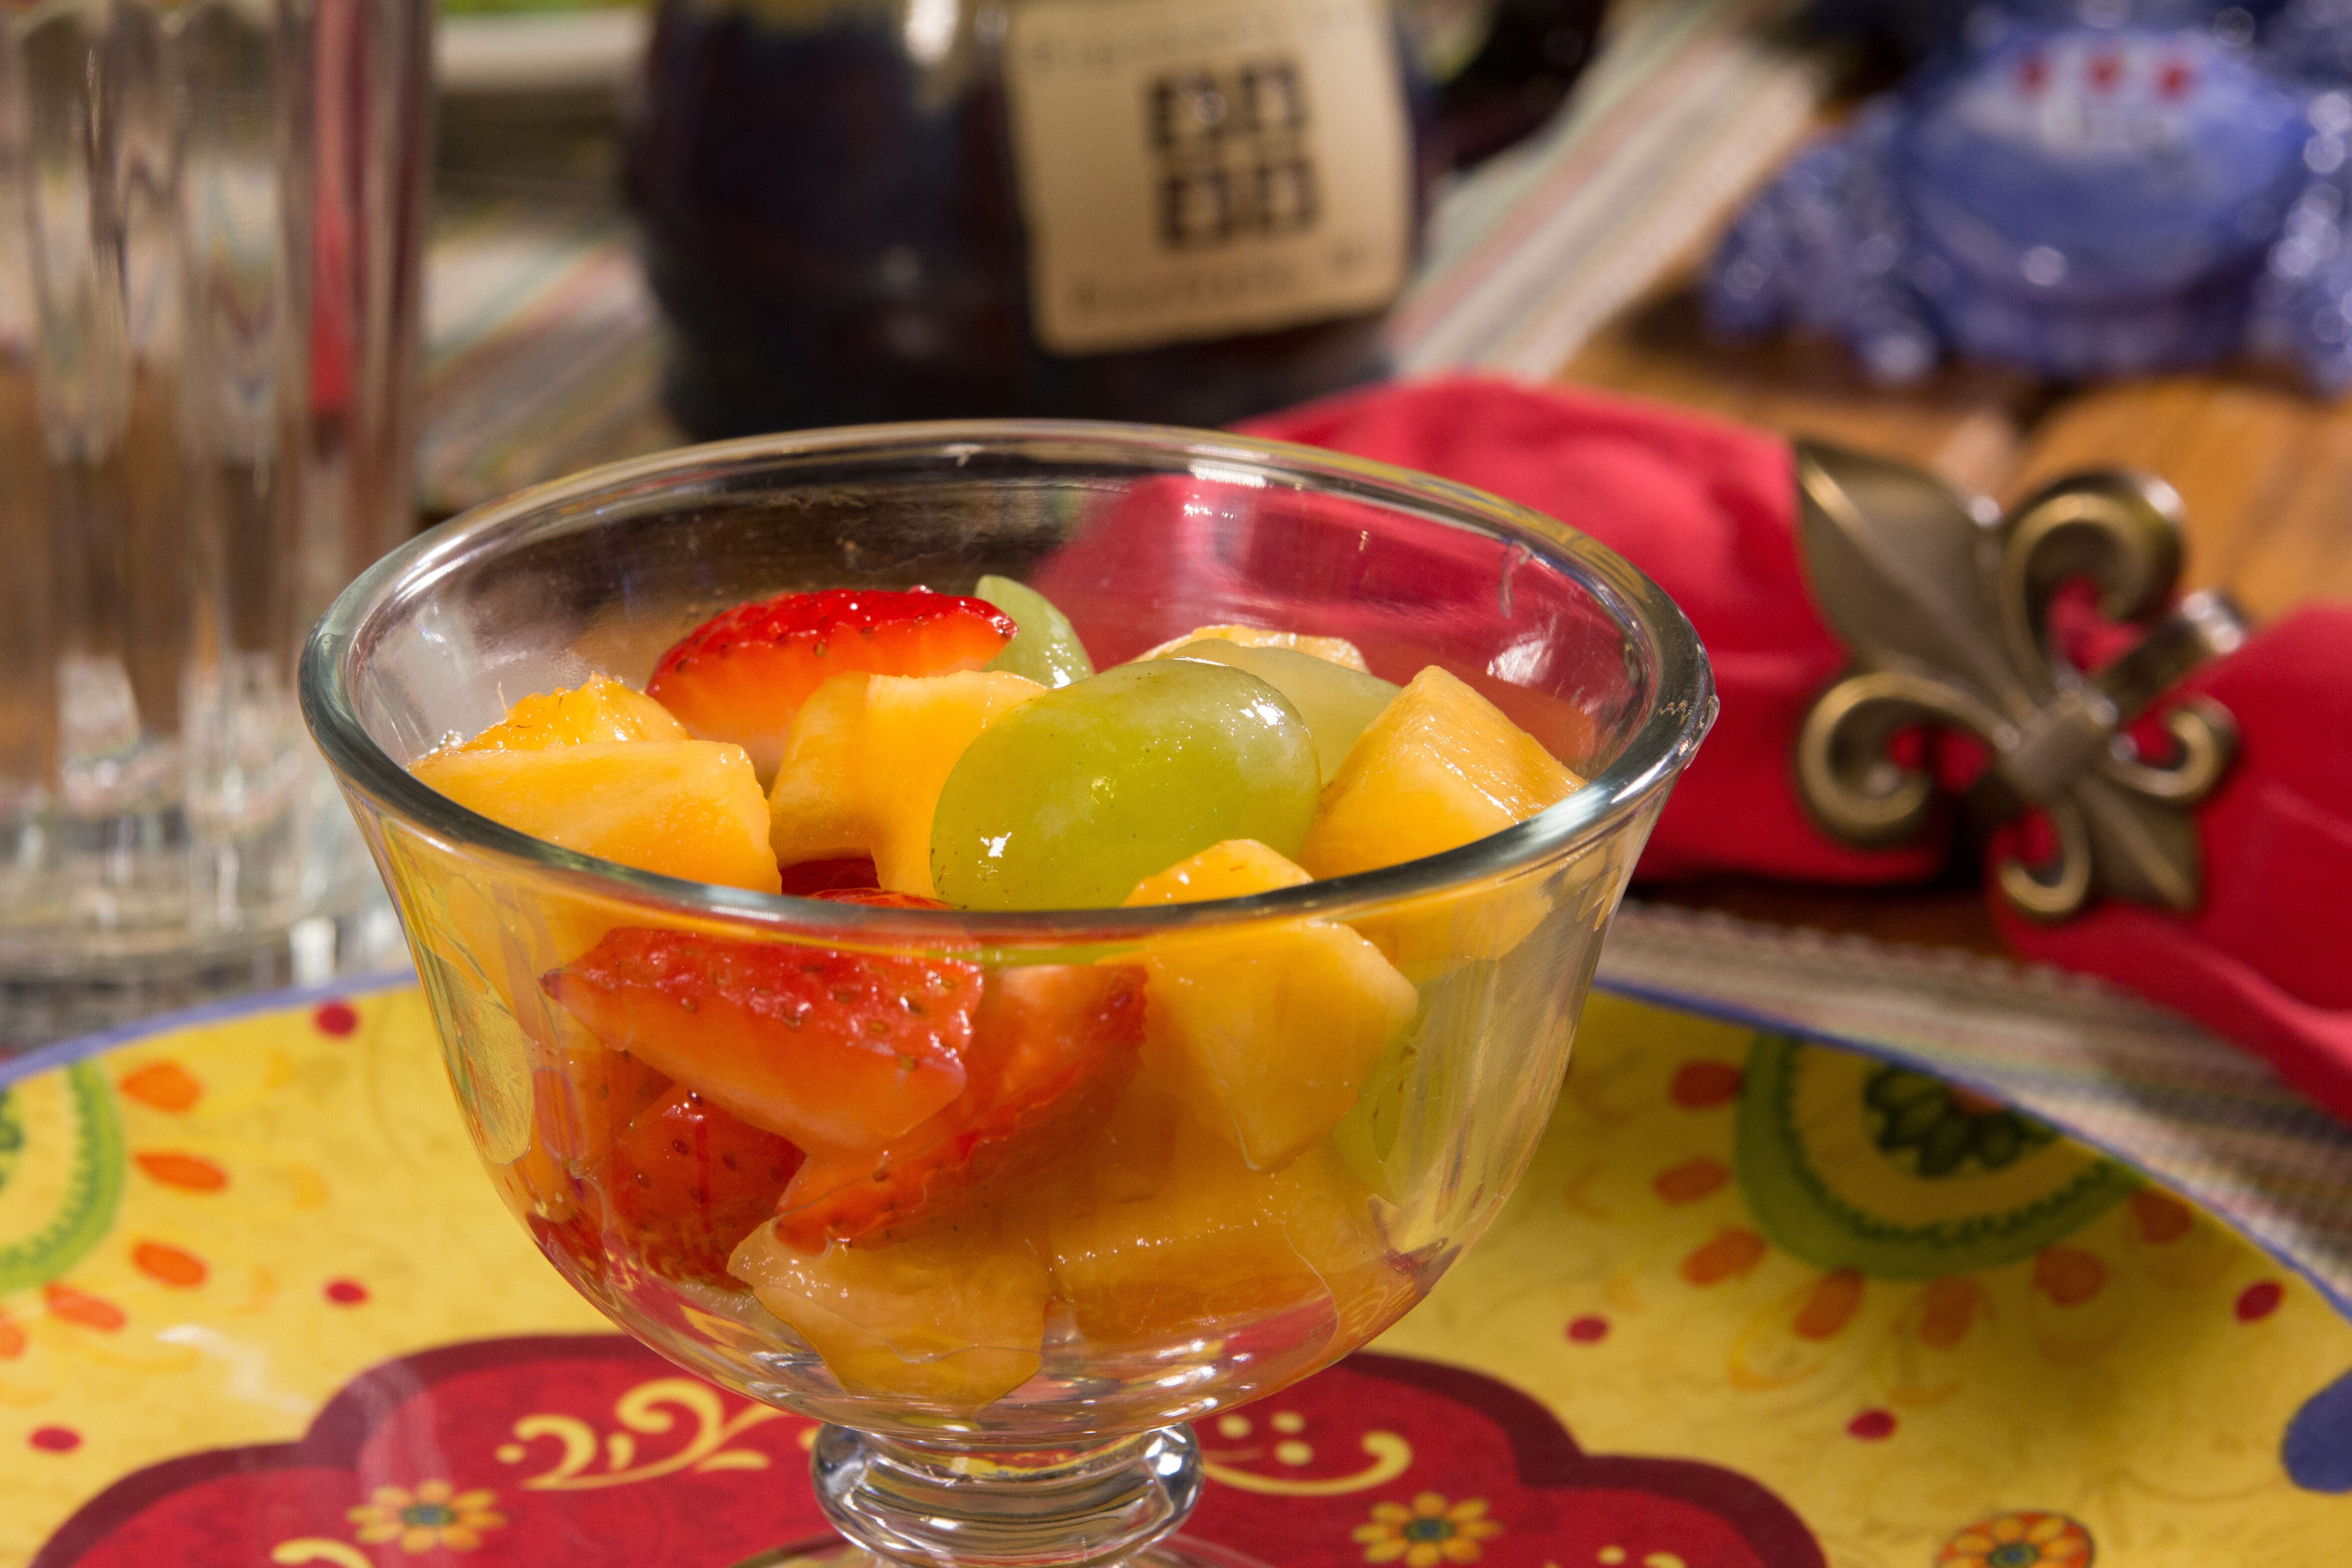 assorted fresh fruit in a clear bowl on a multicolored plate